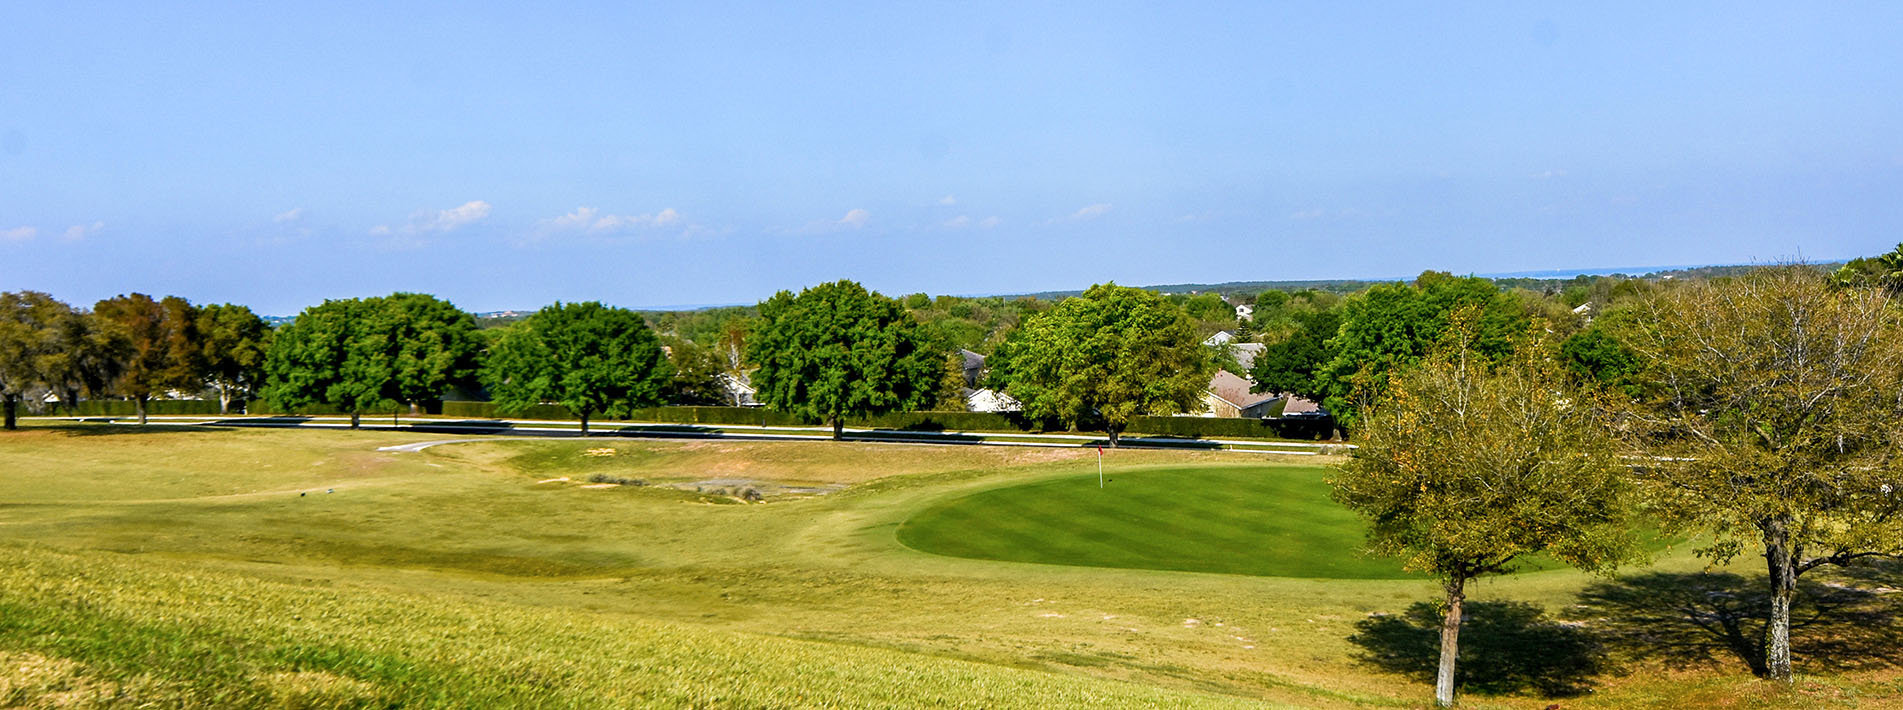 Summit Greens 55+ Active Adult Community - Golf Course